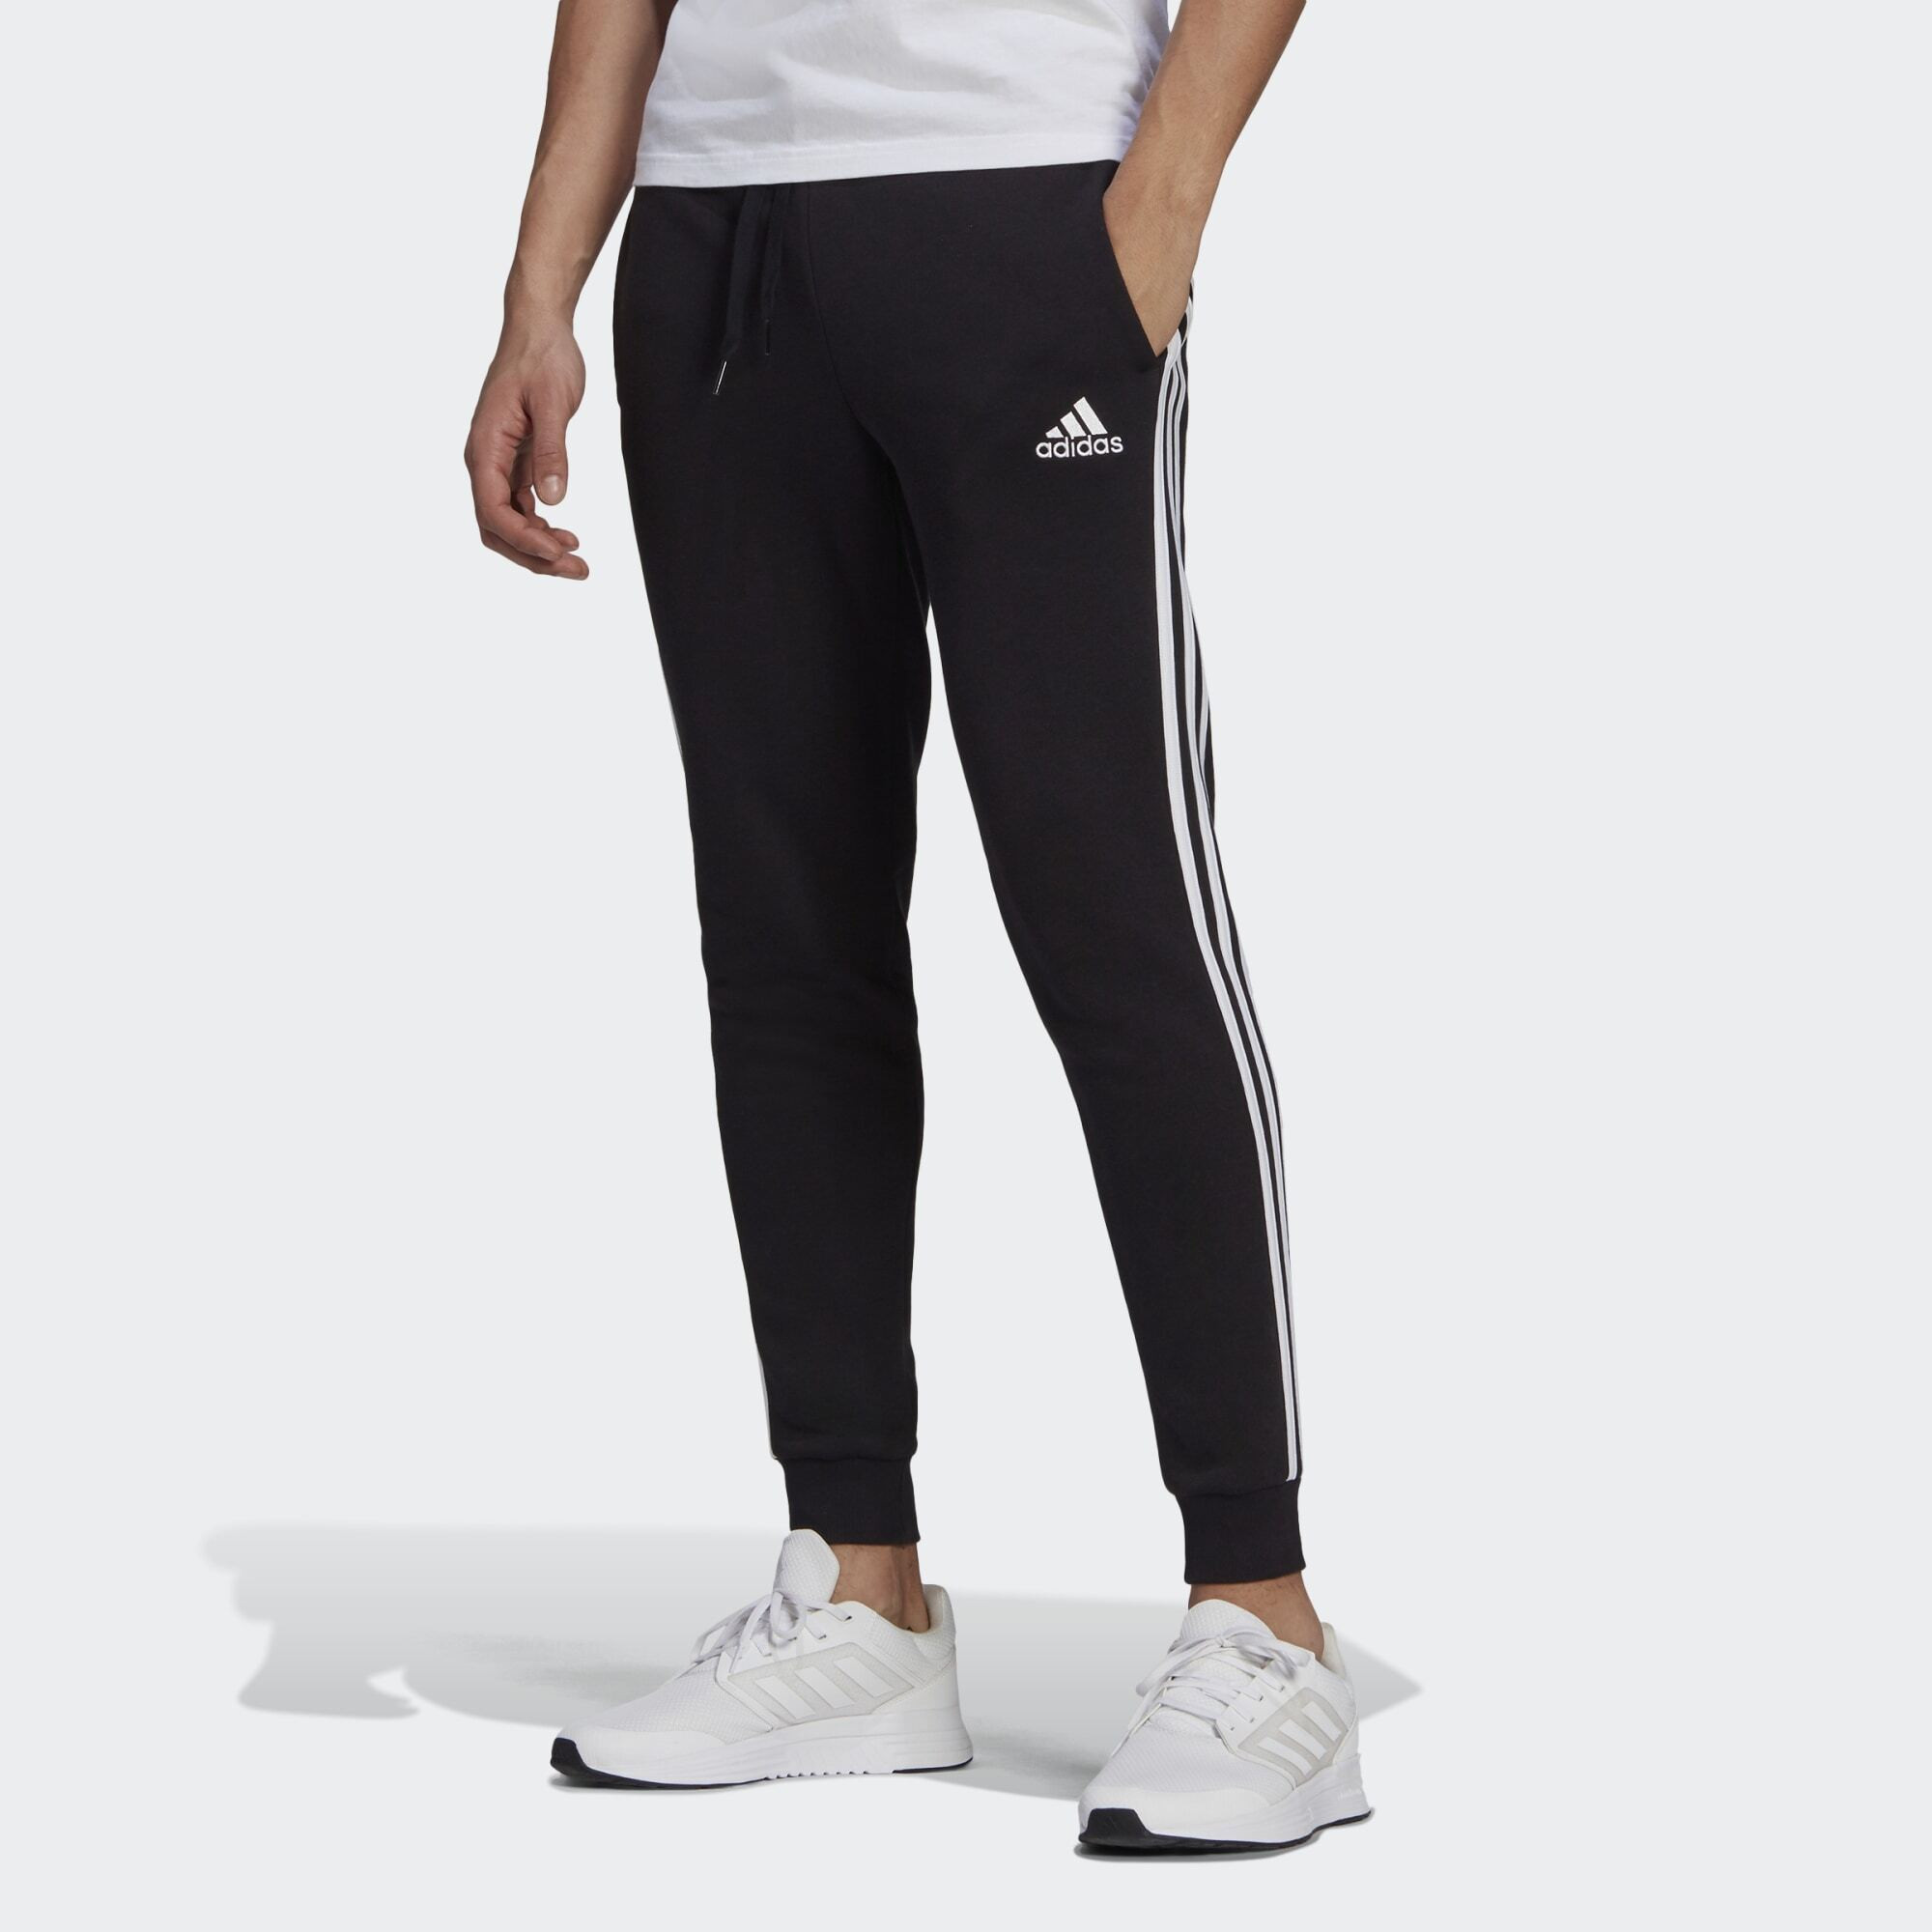 adidas Essentials Fleece Fitted 3-Stripes Pants (9000133351_22872)